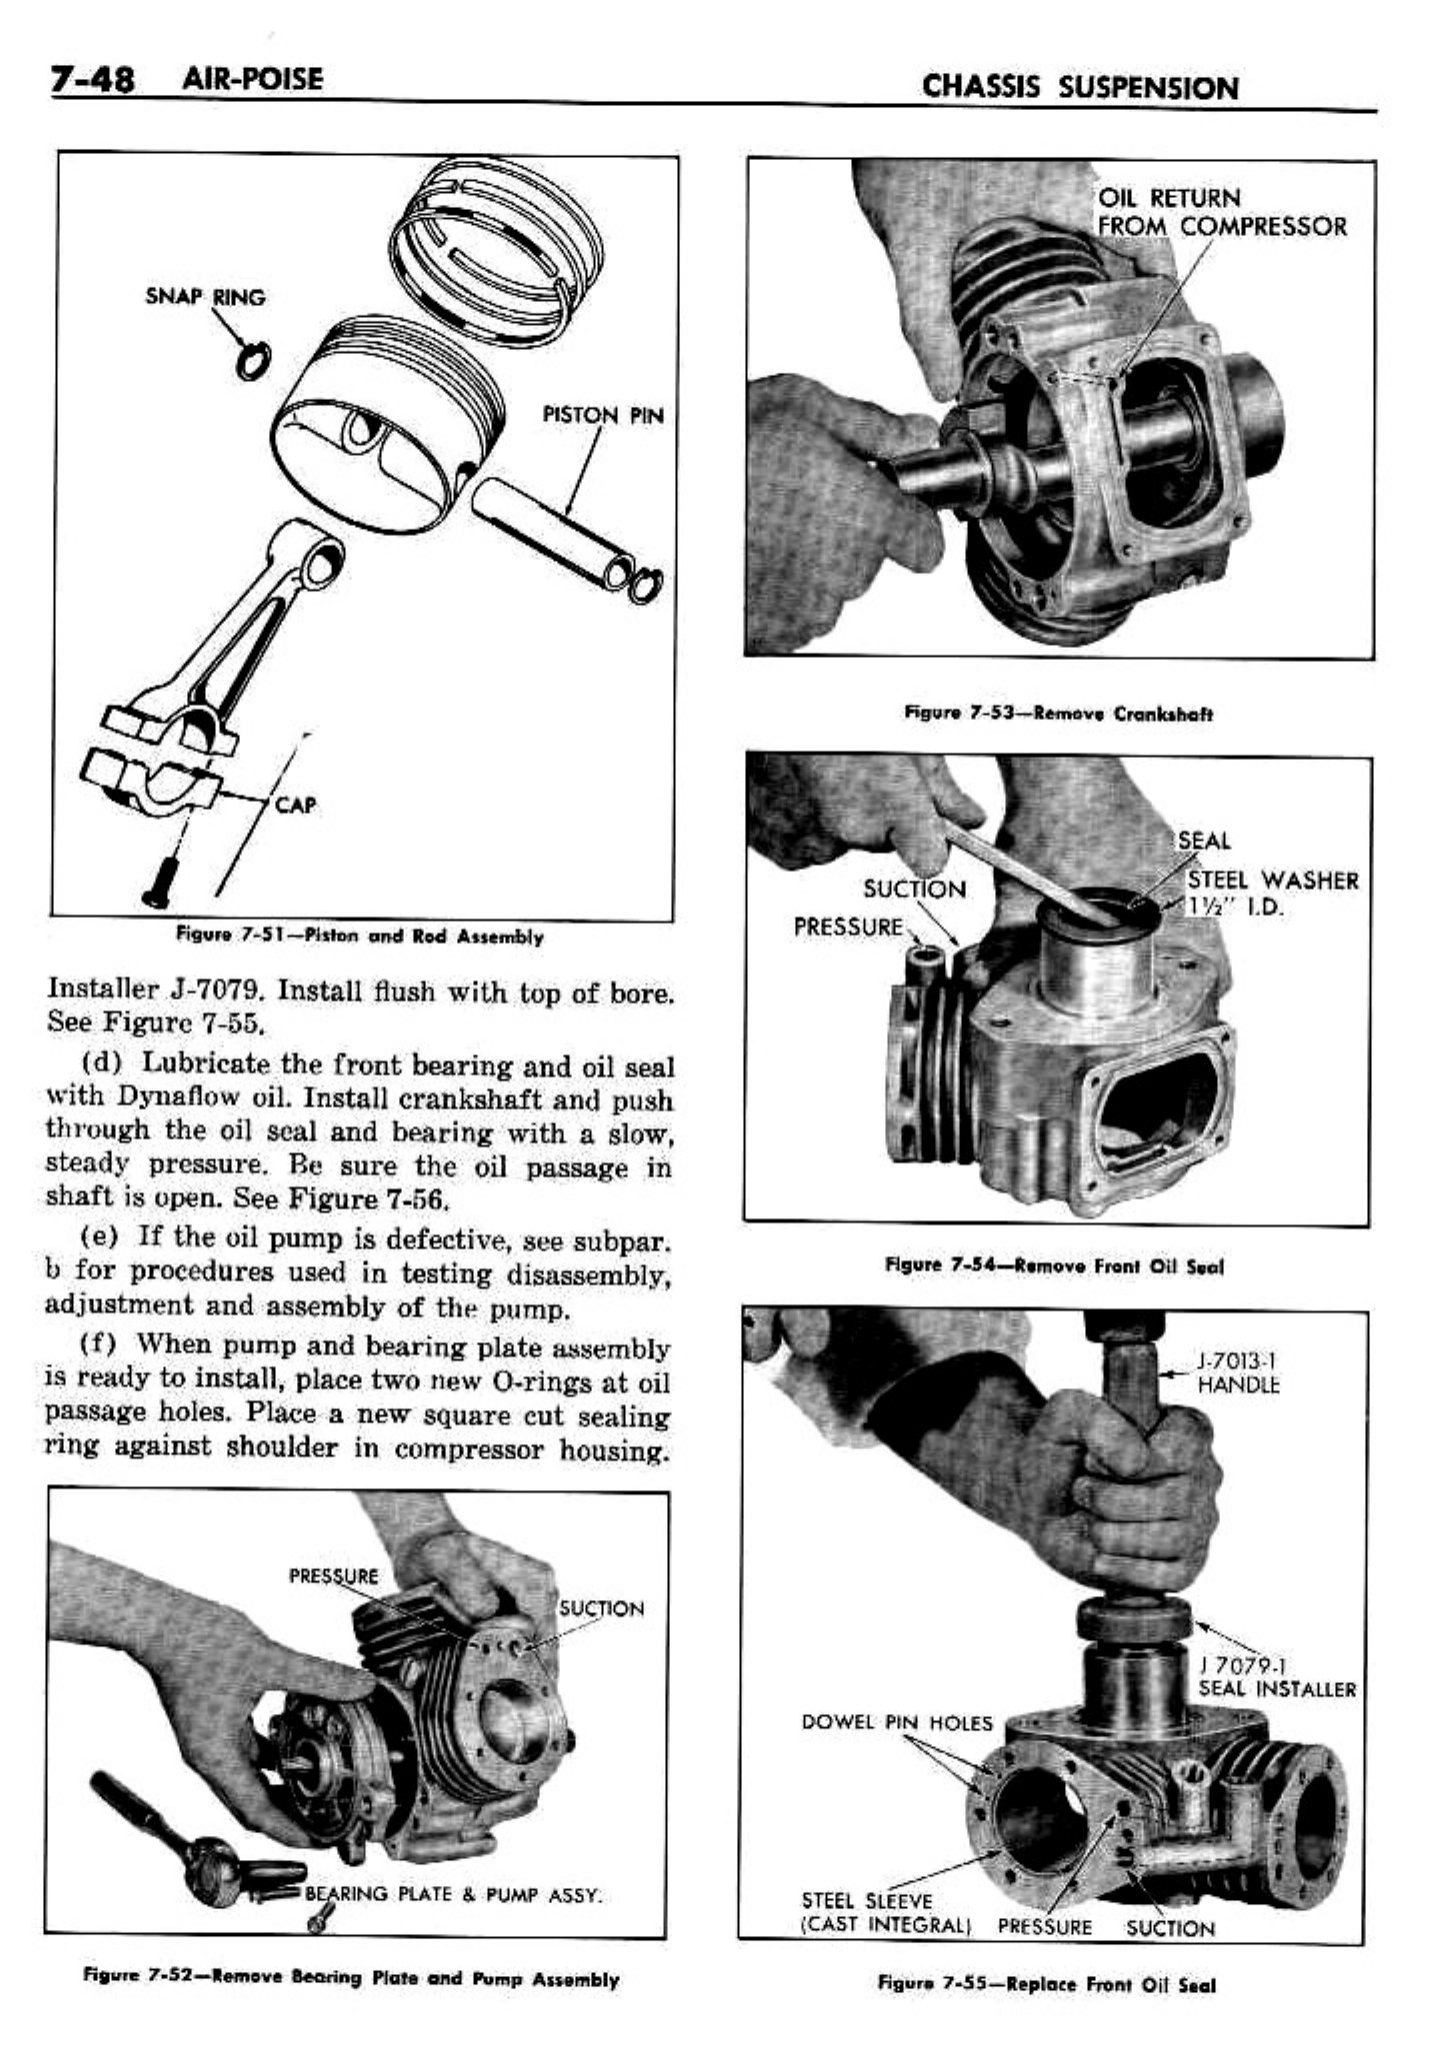 n_08 1958 Buick Shop Manual - Chassis Suspension_48.jpg